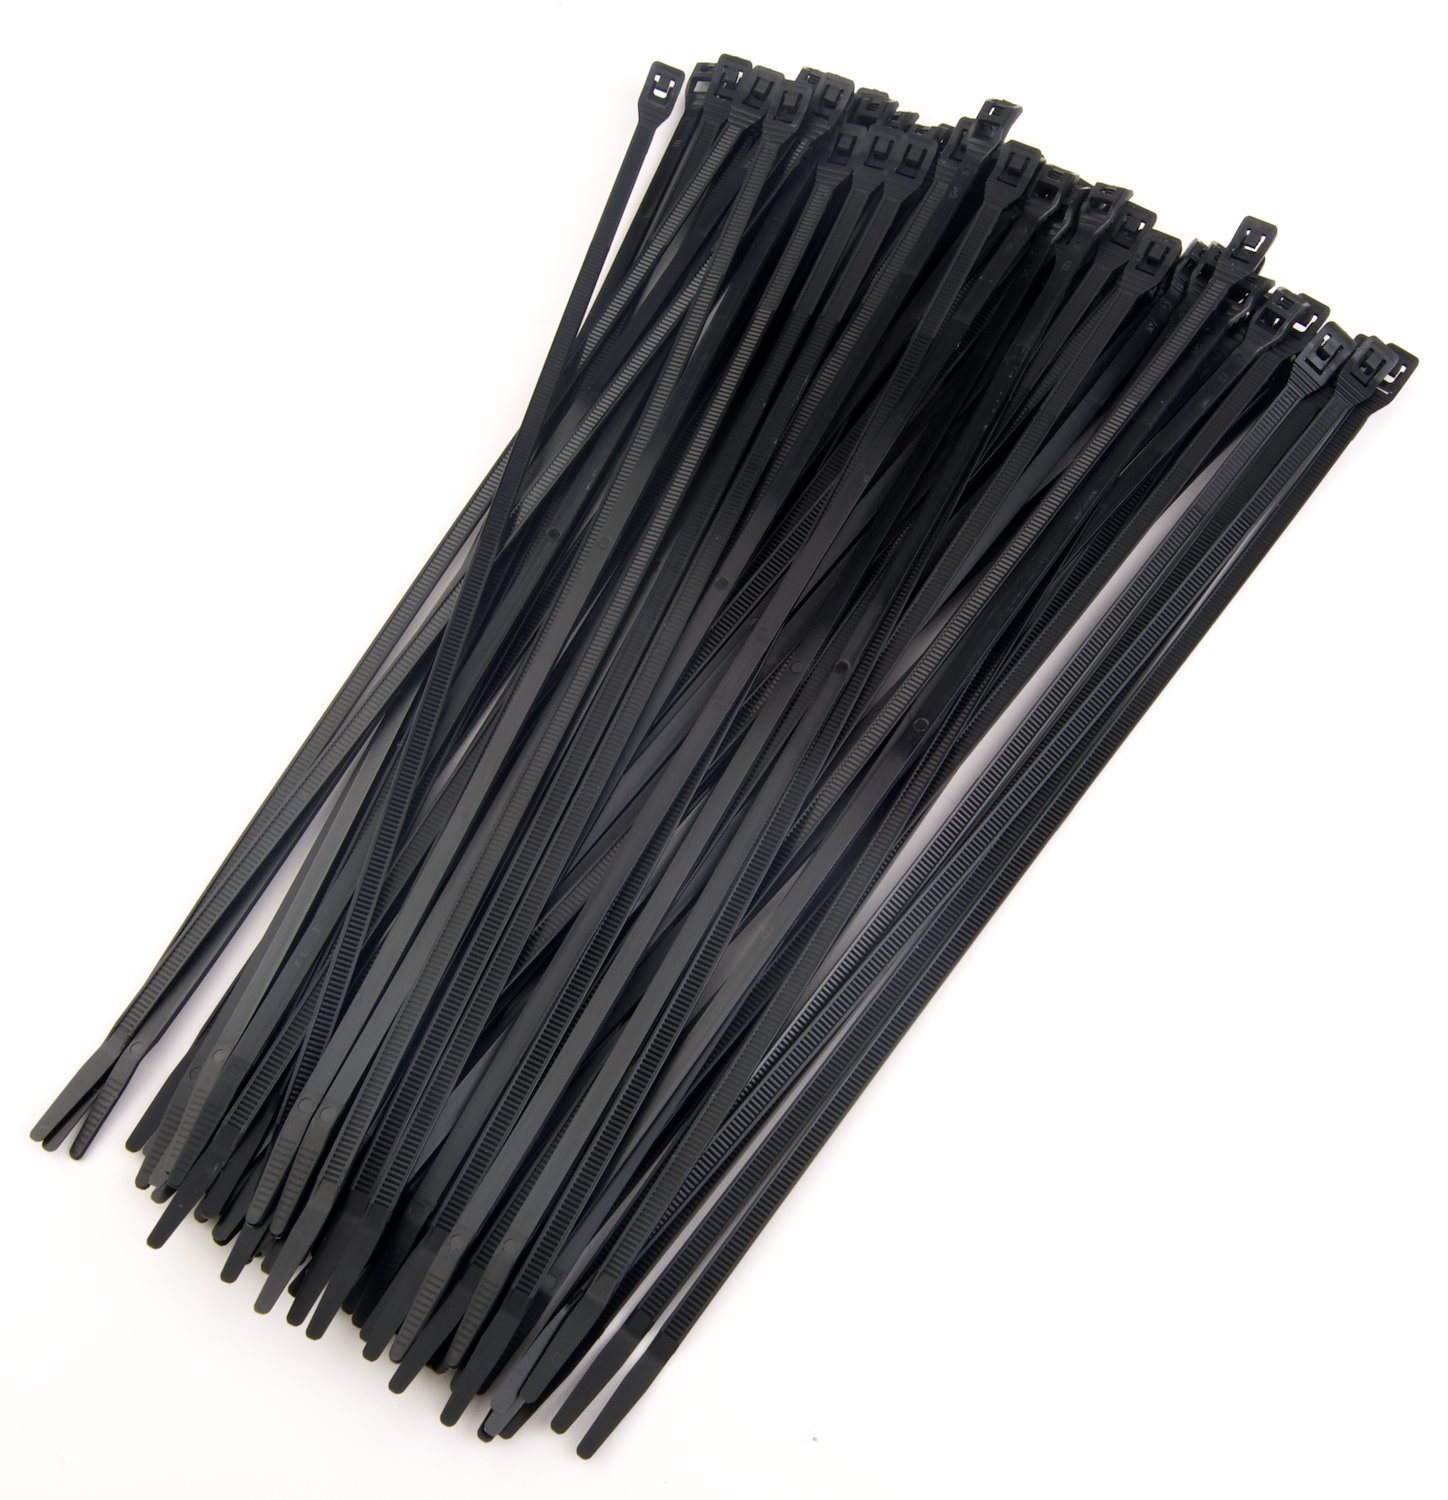 Cobra Low-Profile Wire/Cable Ties [14 in. Black]